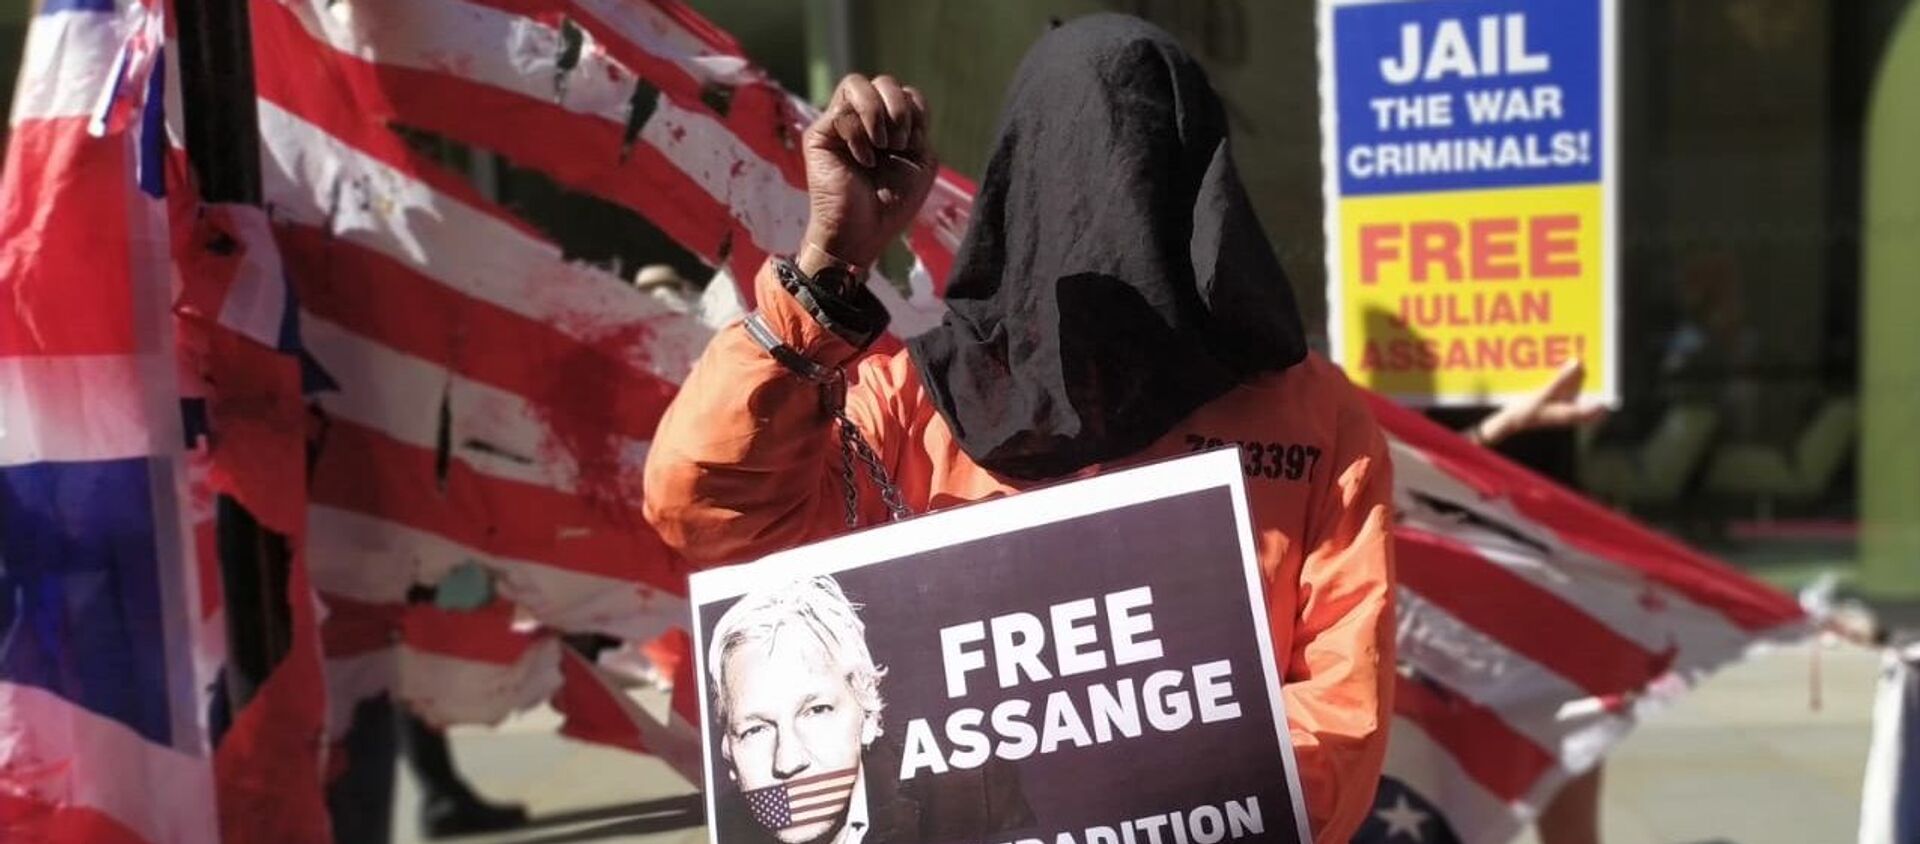 Hooded protester in orange jump suit across from the Old Bailey holding a 'Free Assange' banner - Sputnik International, 1920, 14.09.2020